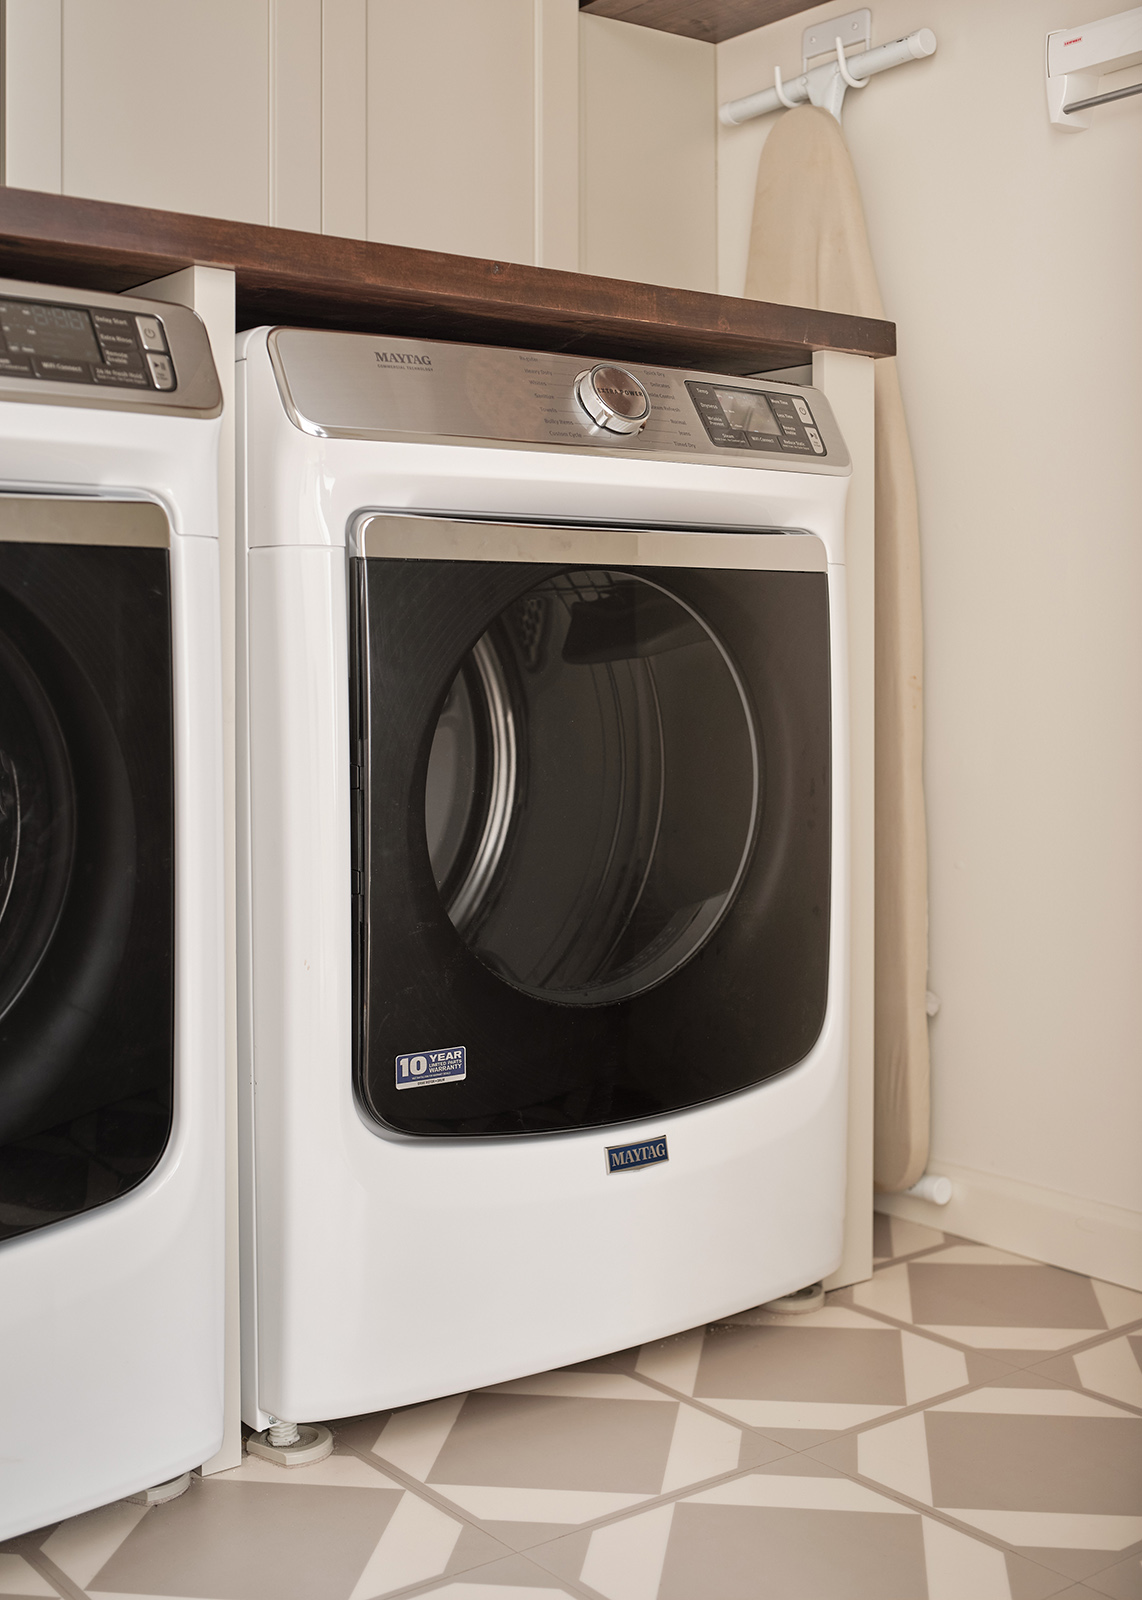 The Maytag® Washer and Dryer Set We Chose